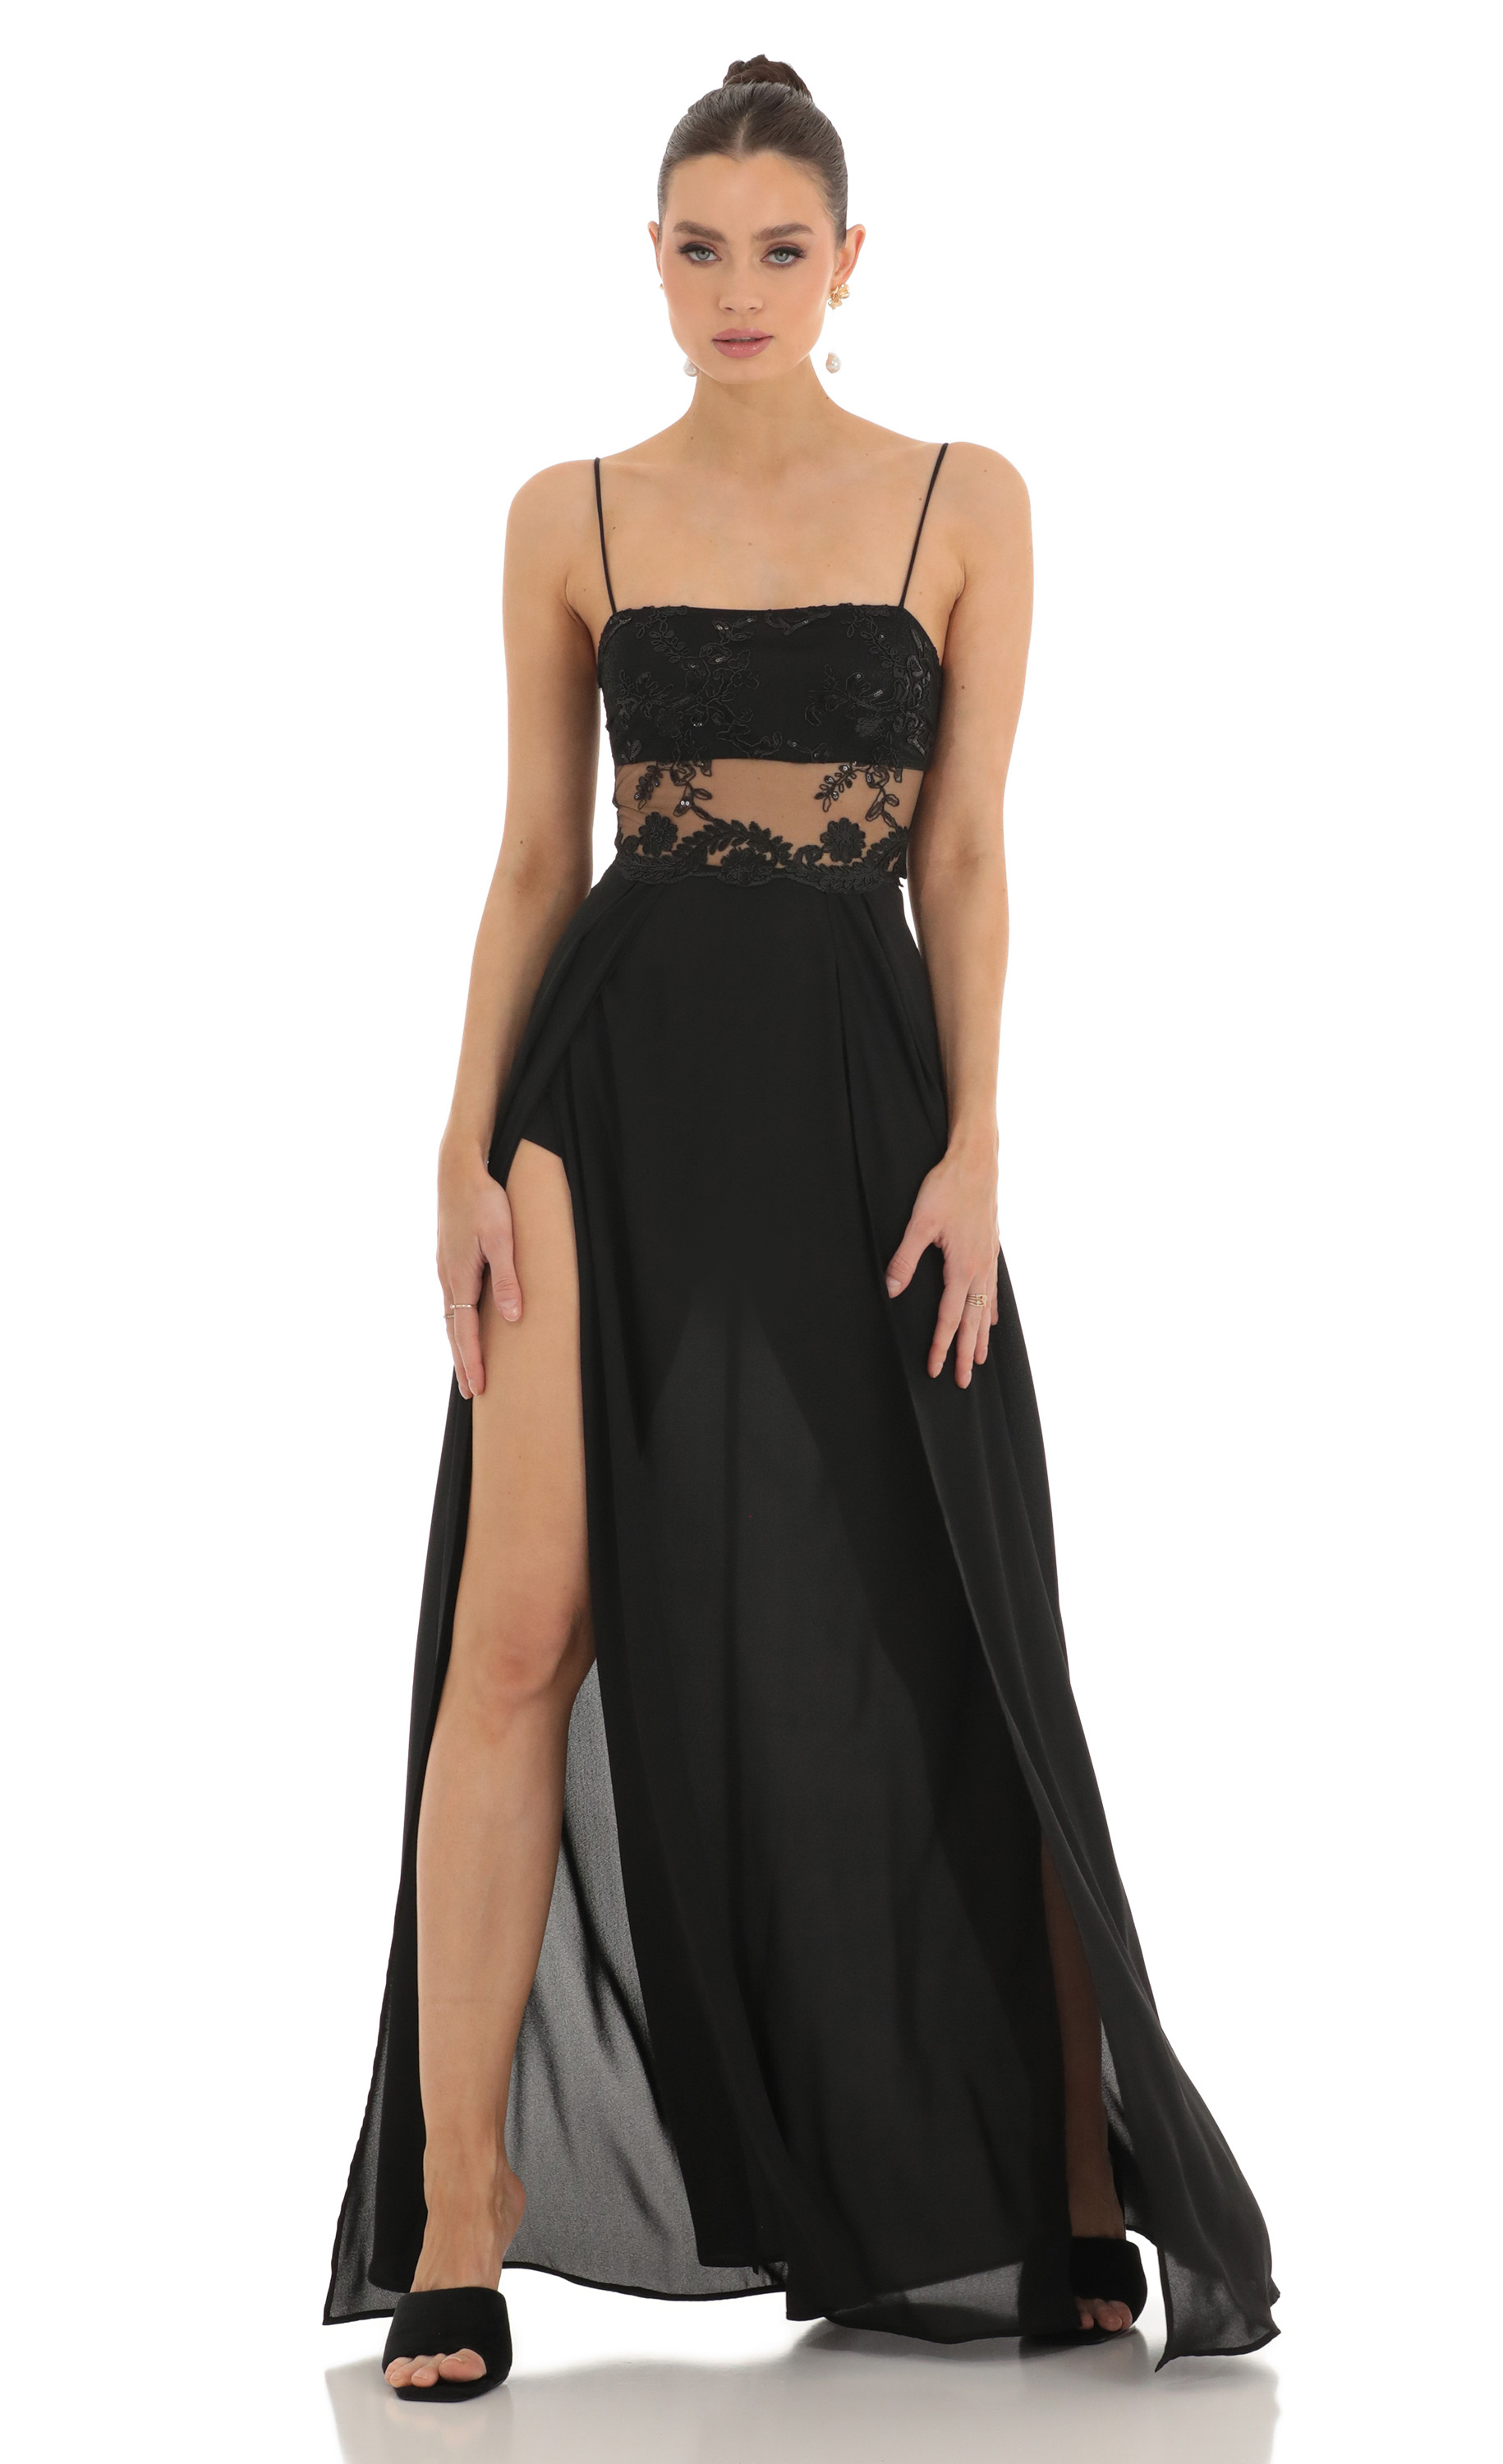 Lace Sequin Maxi Dress in Black